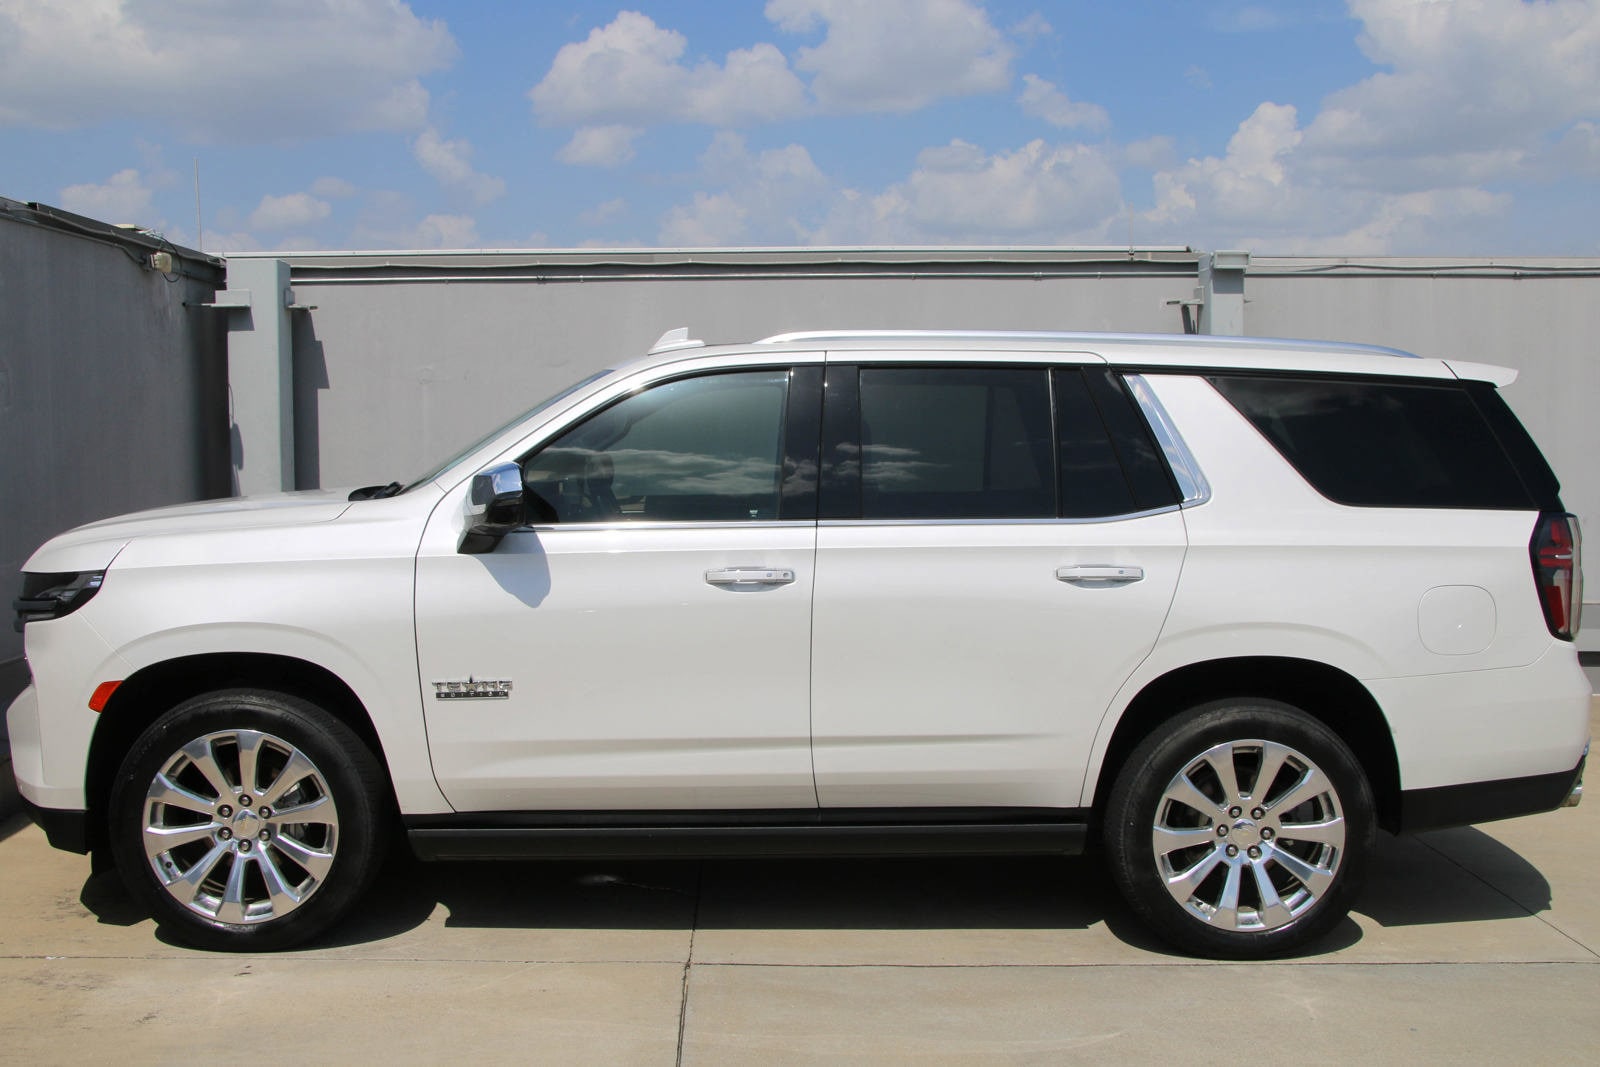 Used 2021 Chevrolet Tahoe Premier with VIN 1GNSCSKD5MR306289 for sale in Sugar Land, TX